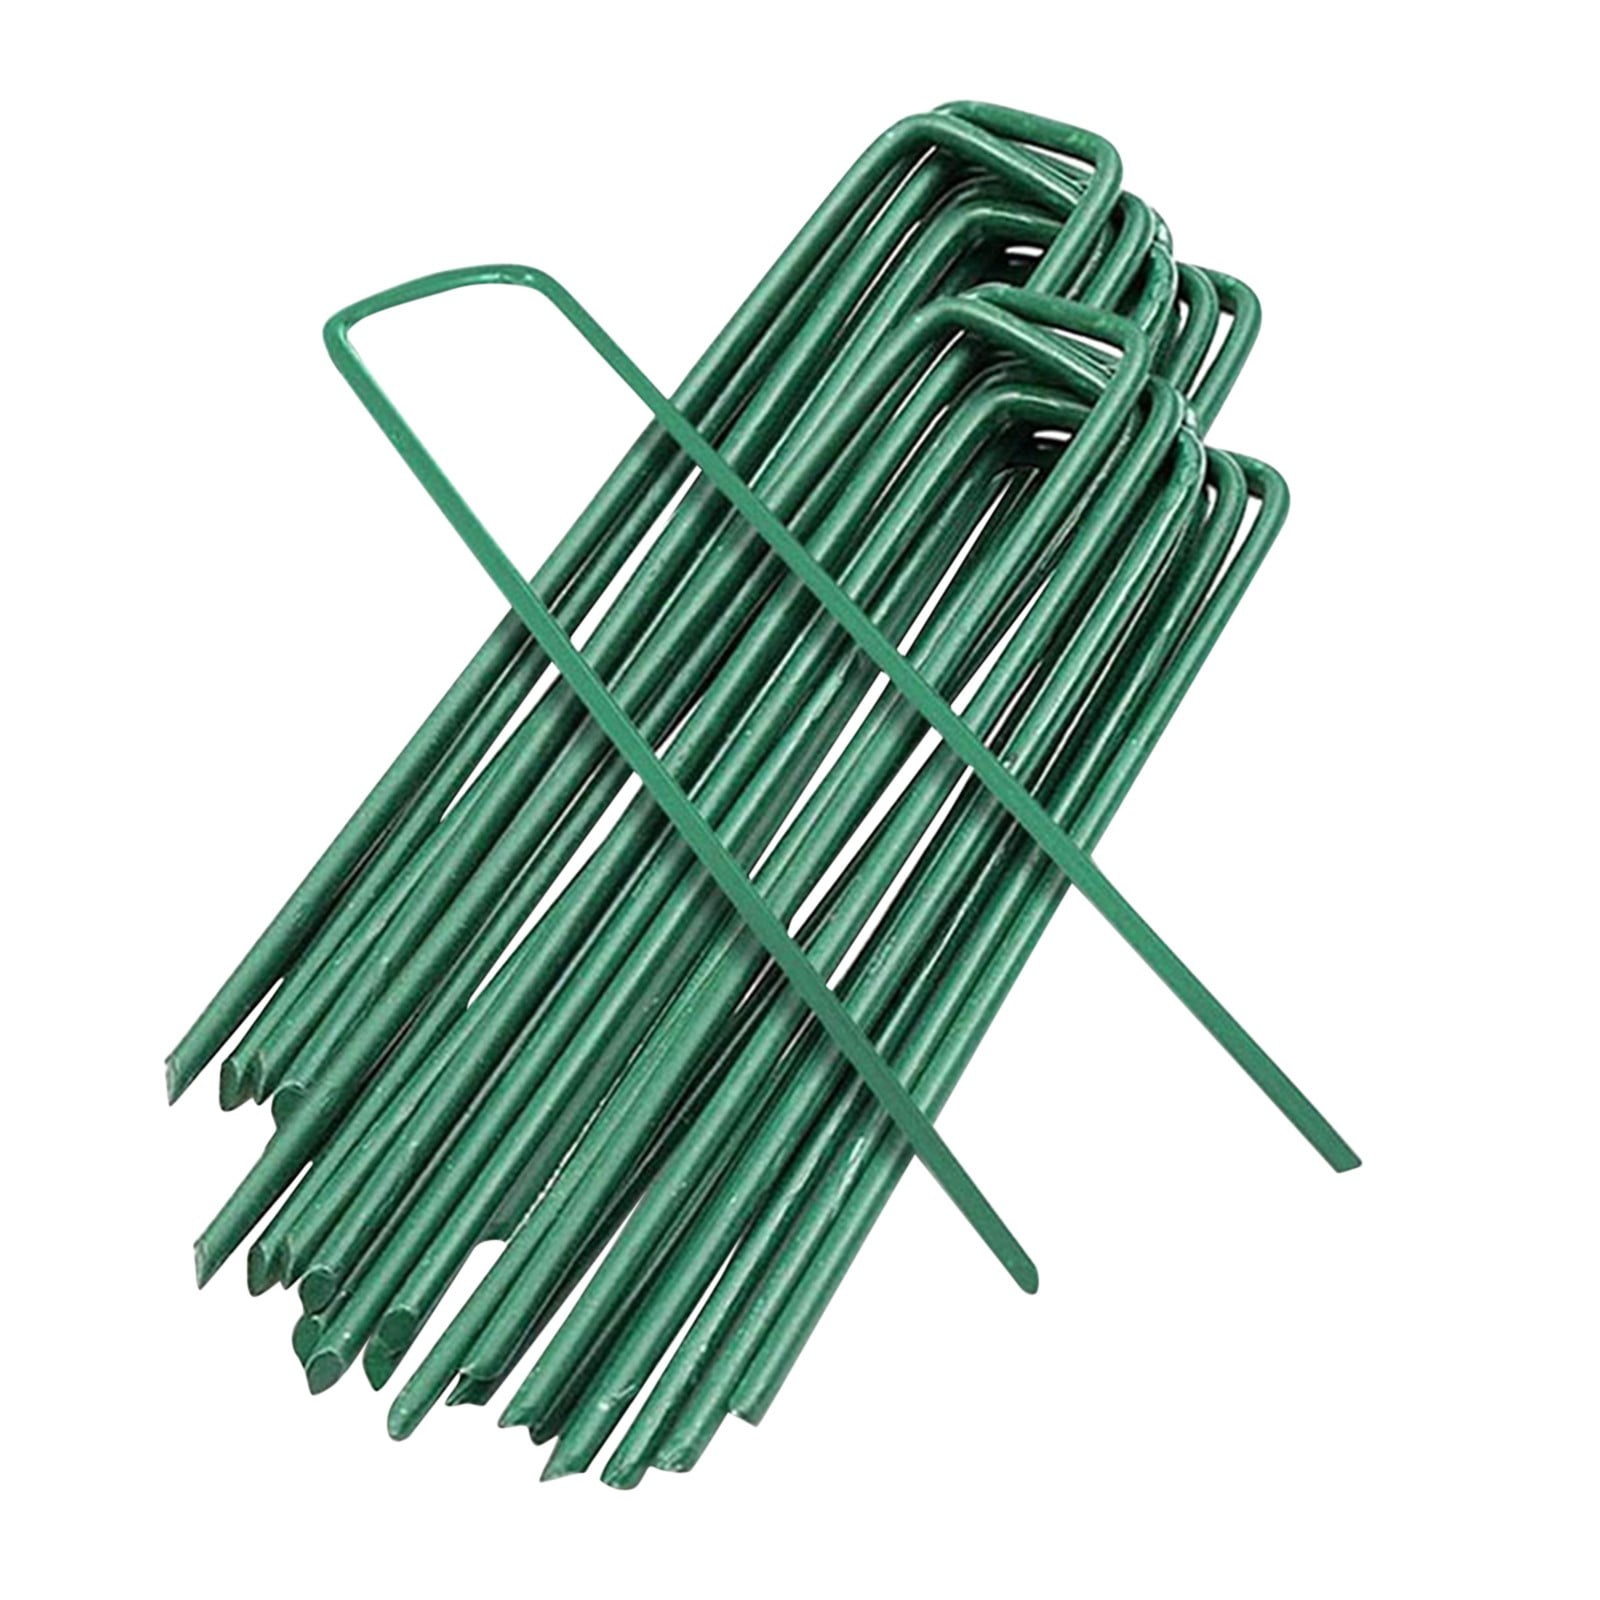 Irrigation Tubing Soaker Hose Tents Tarps Wireless Invisible Dog Fence 100 pcs 6-Inch Garden Landscape Staples Stakes Pins U-Type Turf Staples for Artificial Grass Ground Cover 